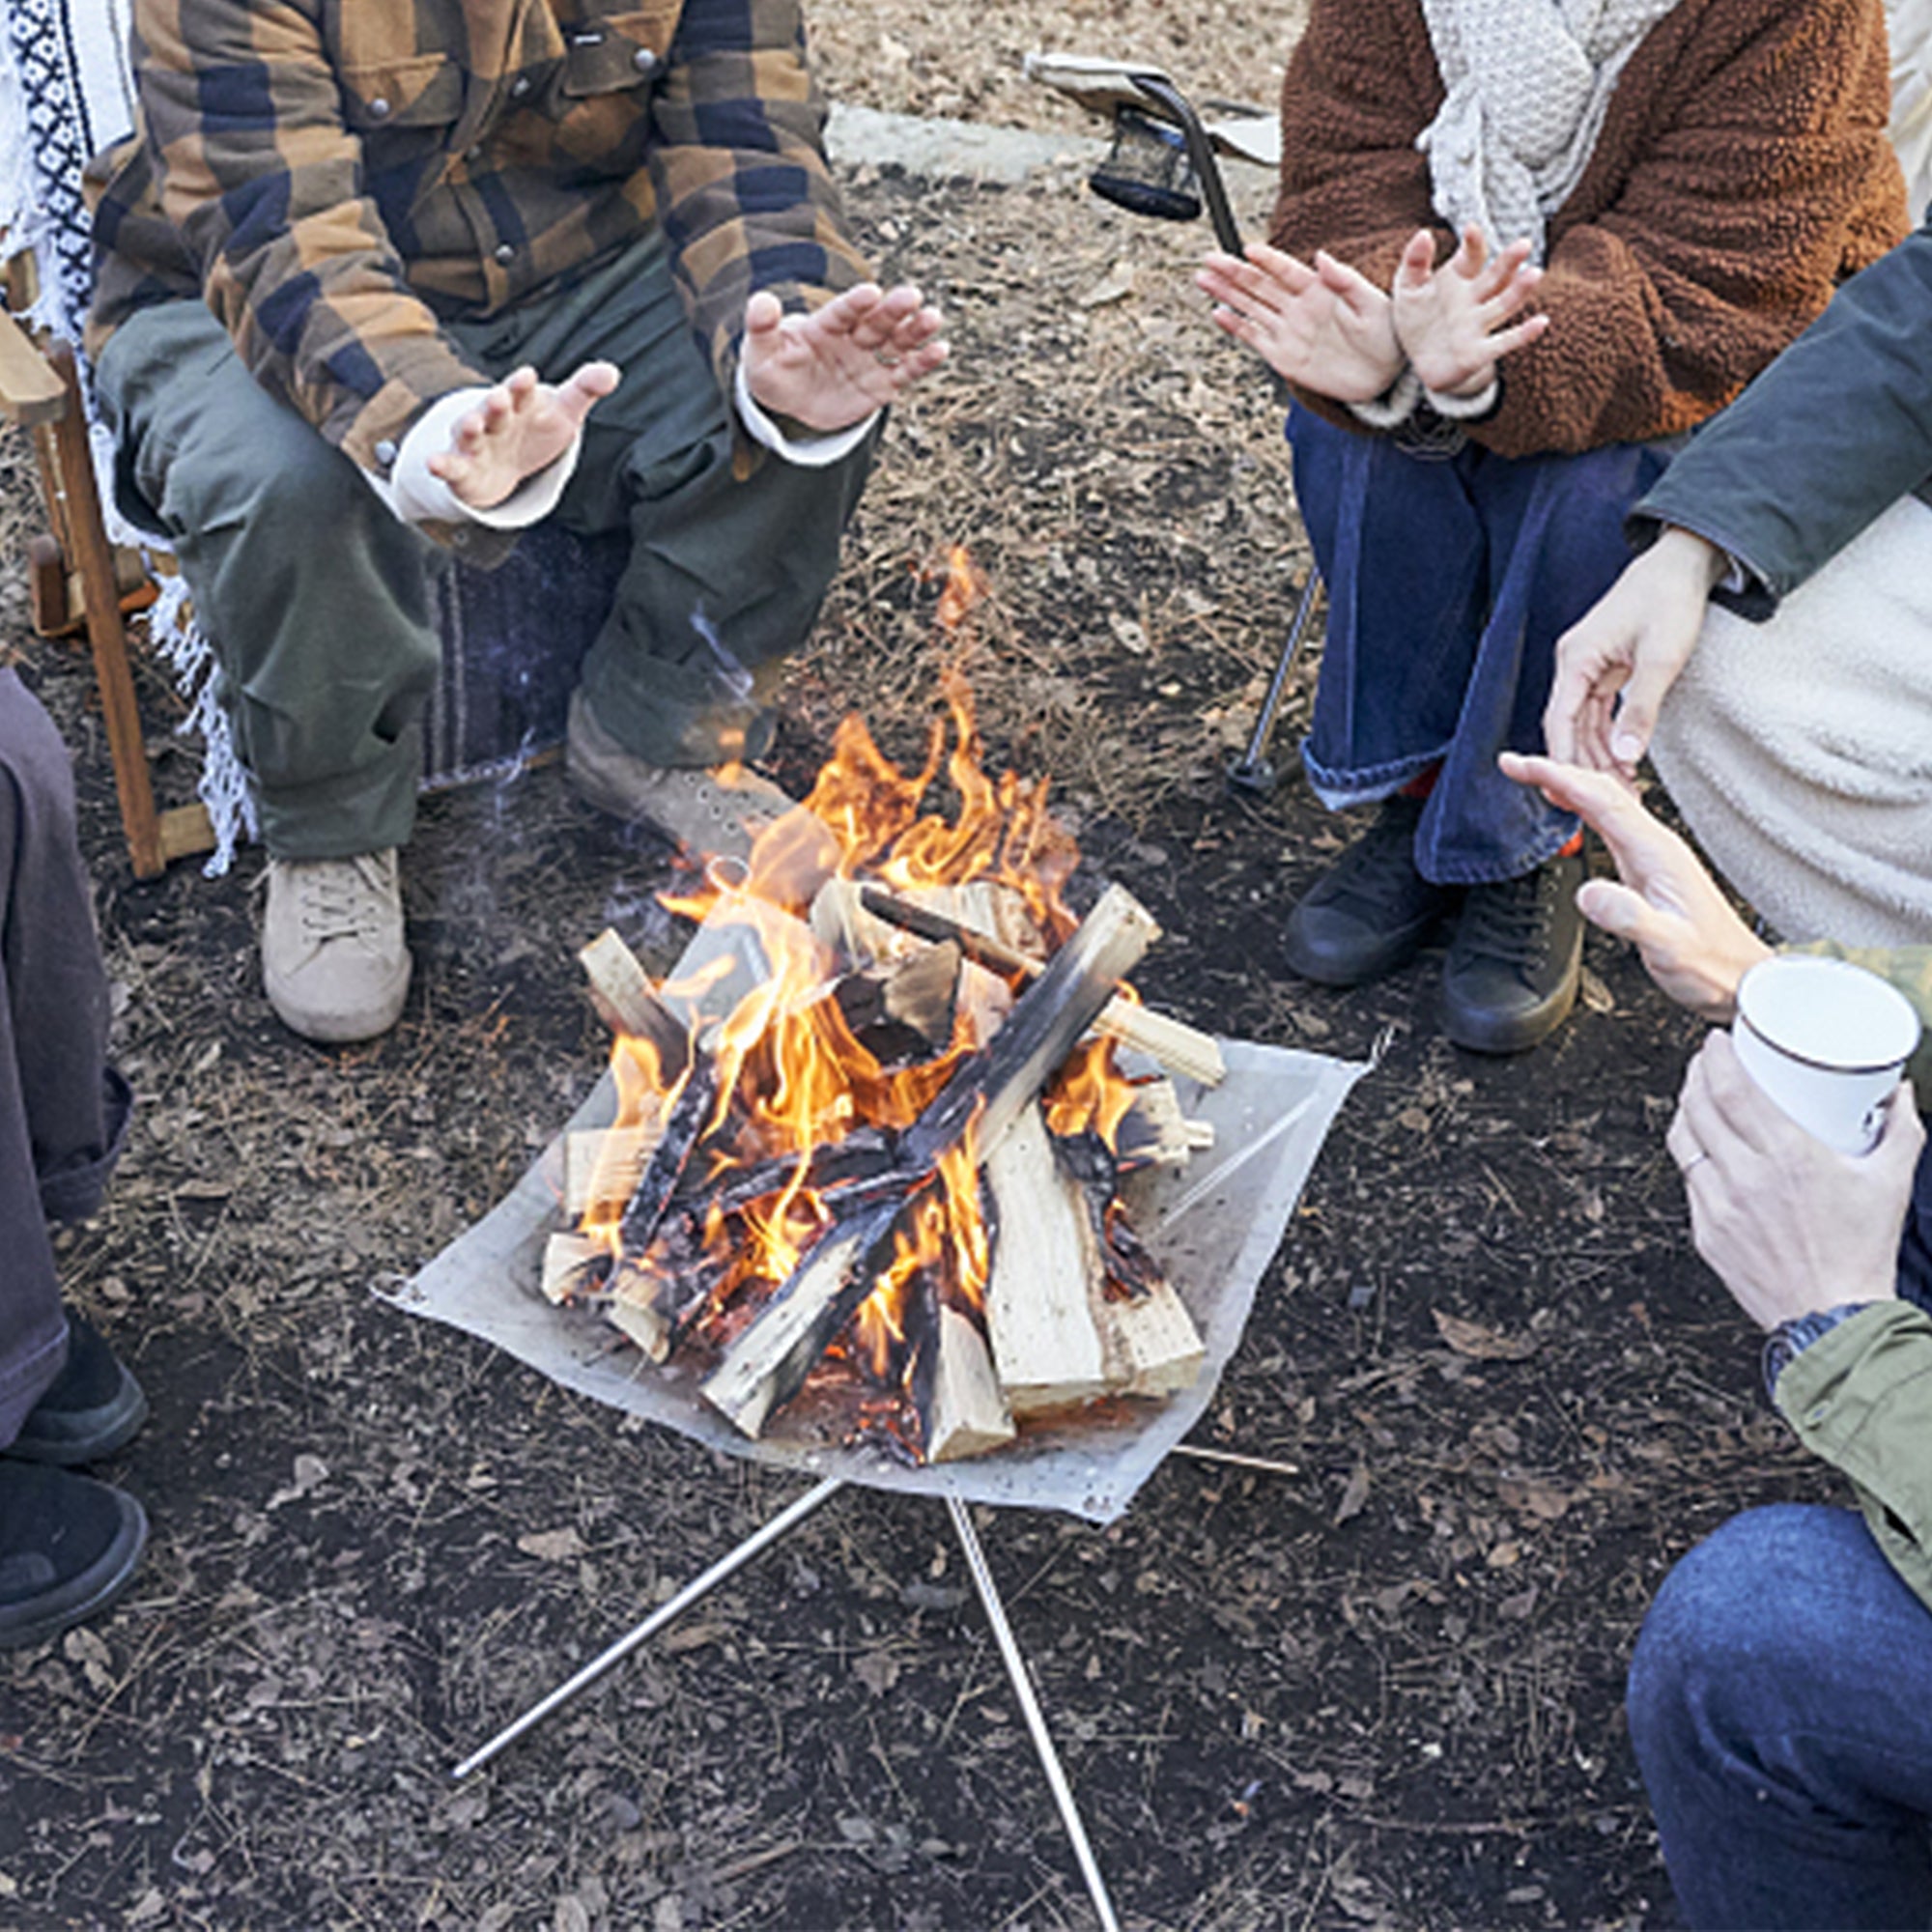 A Group of People Camping Around Stainless Steel Fire Pit.